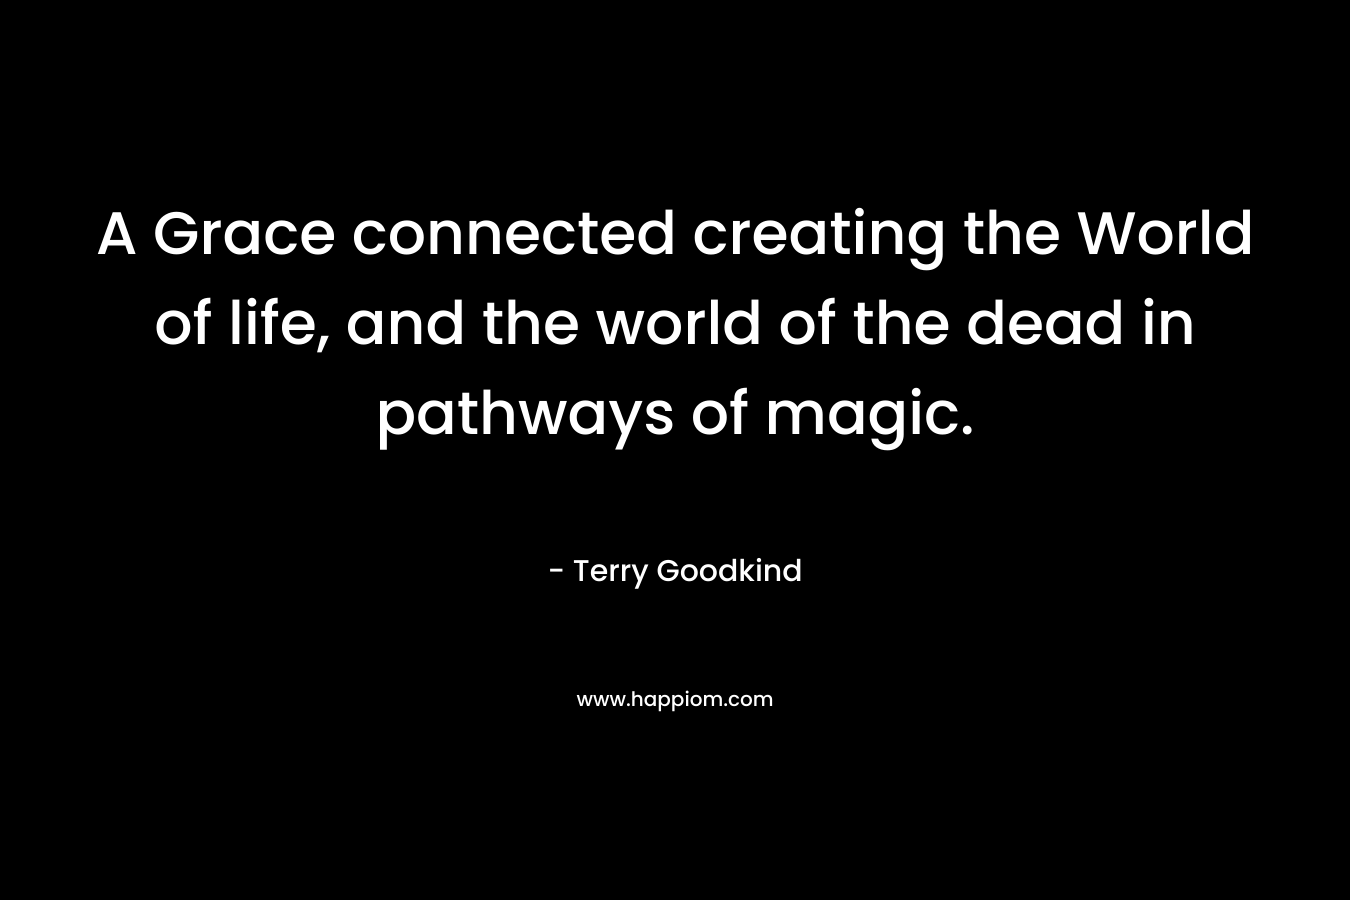 A Grace connected creating the World of life, and the world of the dead in pathways of magic. – Terry Goodkind